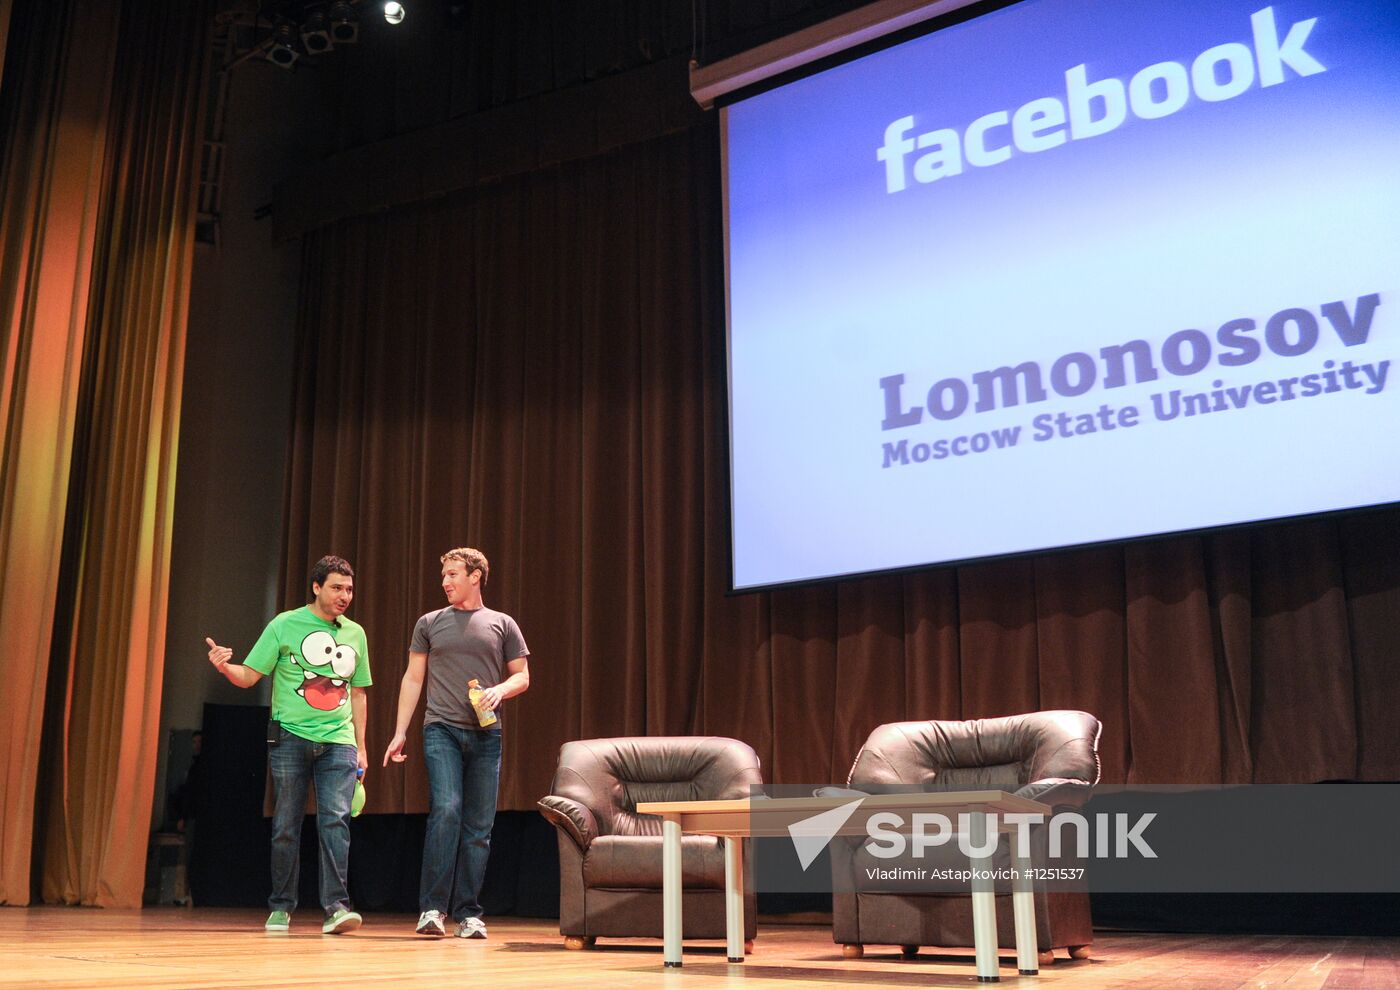 Mark Zuckerberg giving lectures in Moscow State University